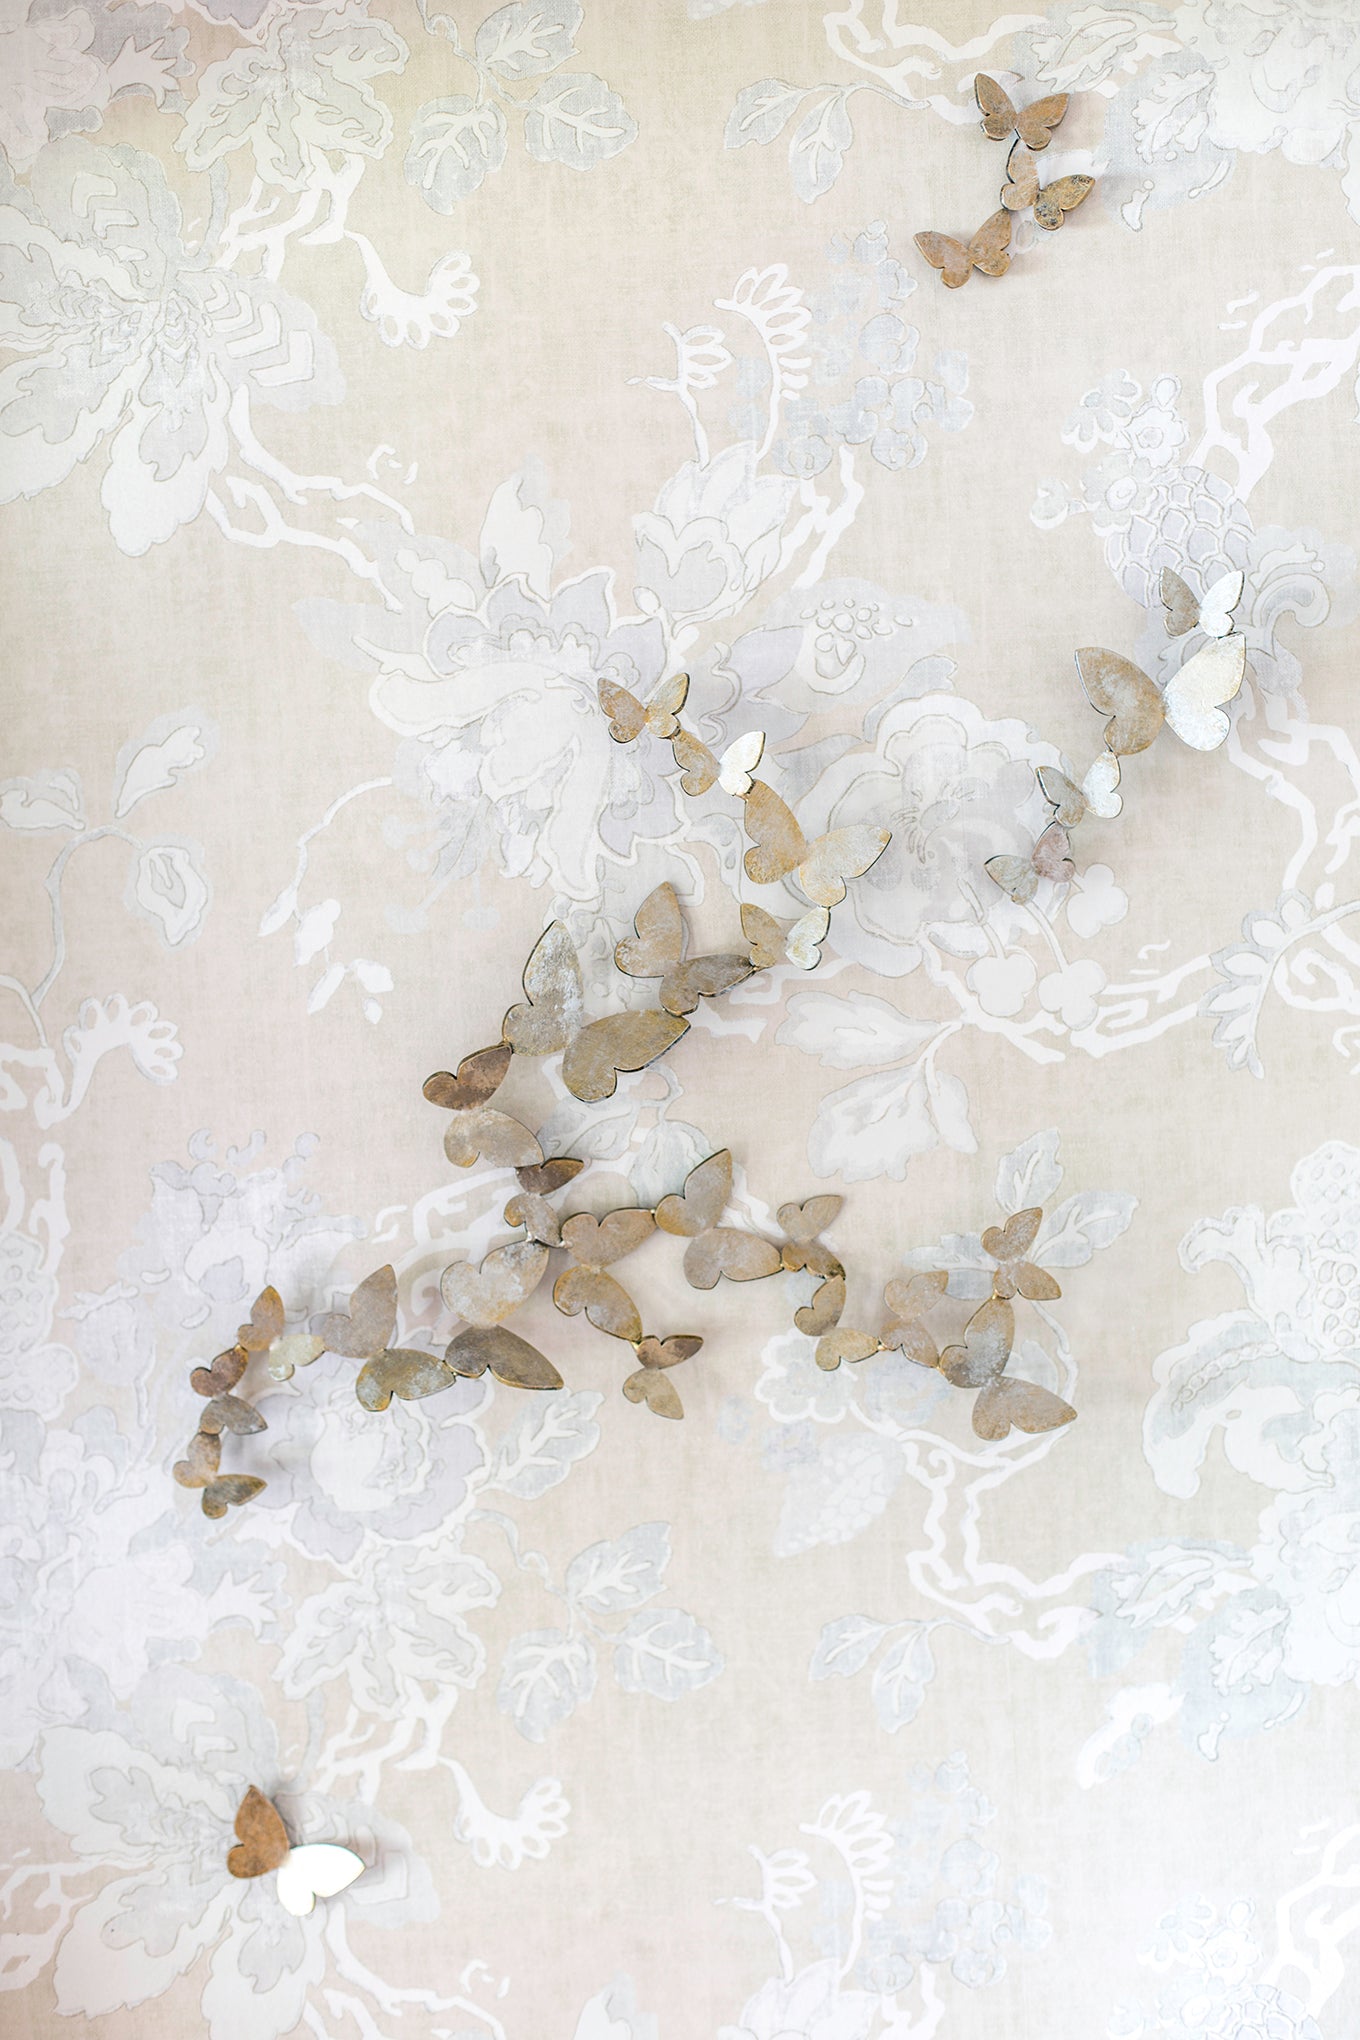 Butterfly Wall Sculpture with marbled background